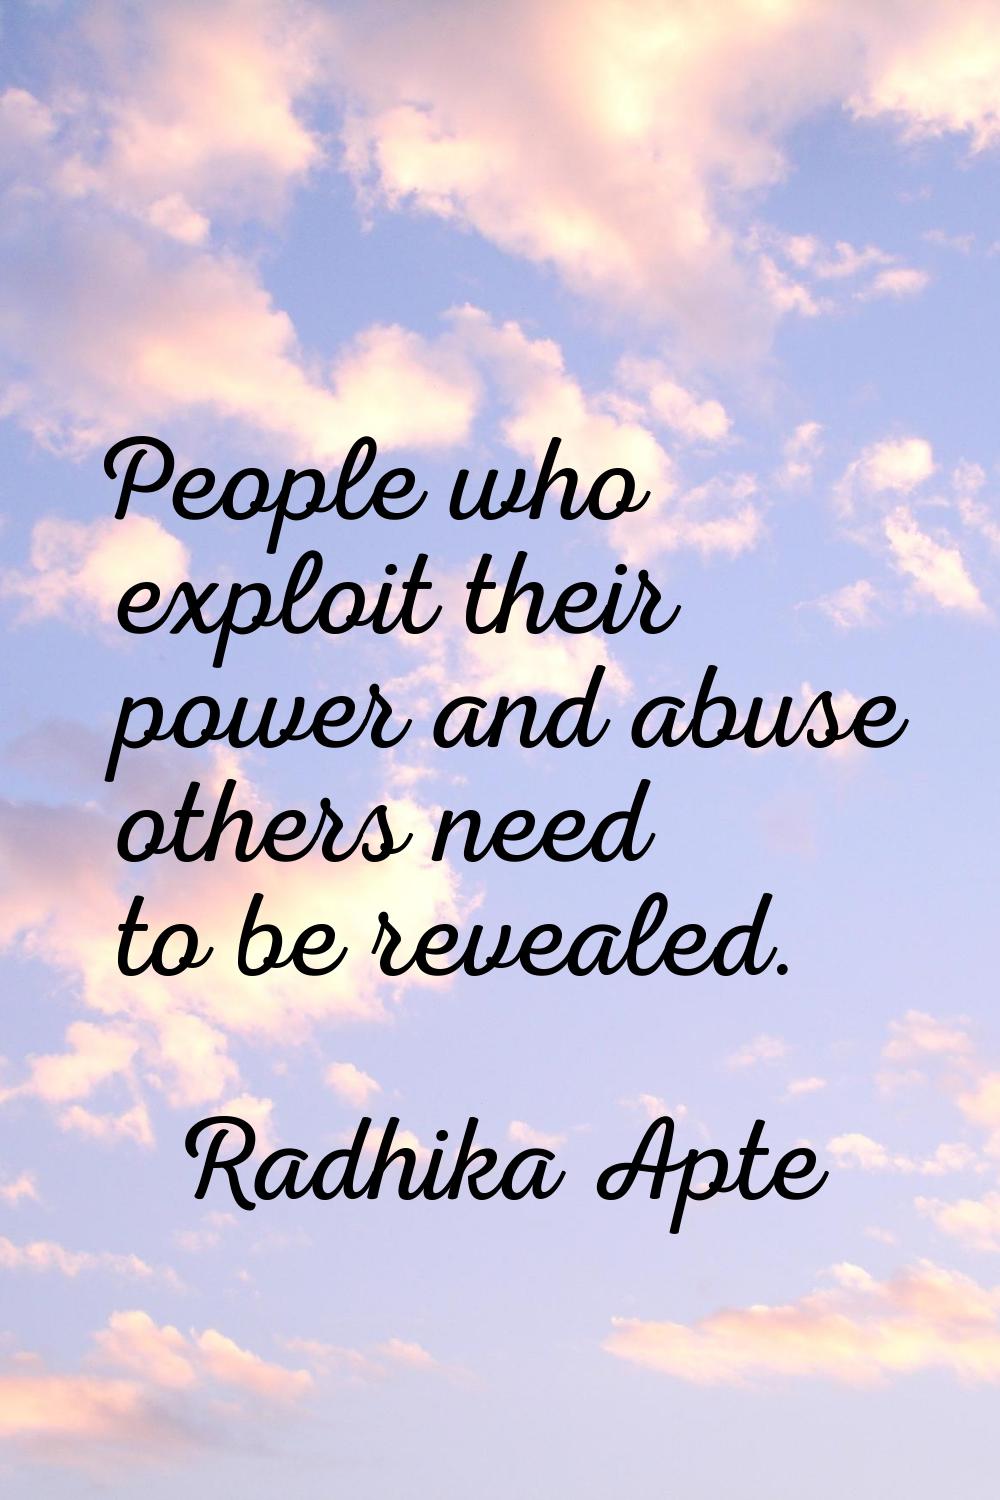 People who exploit their power and abuse others need to be revealed.